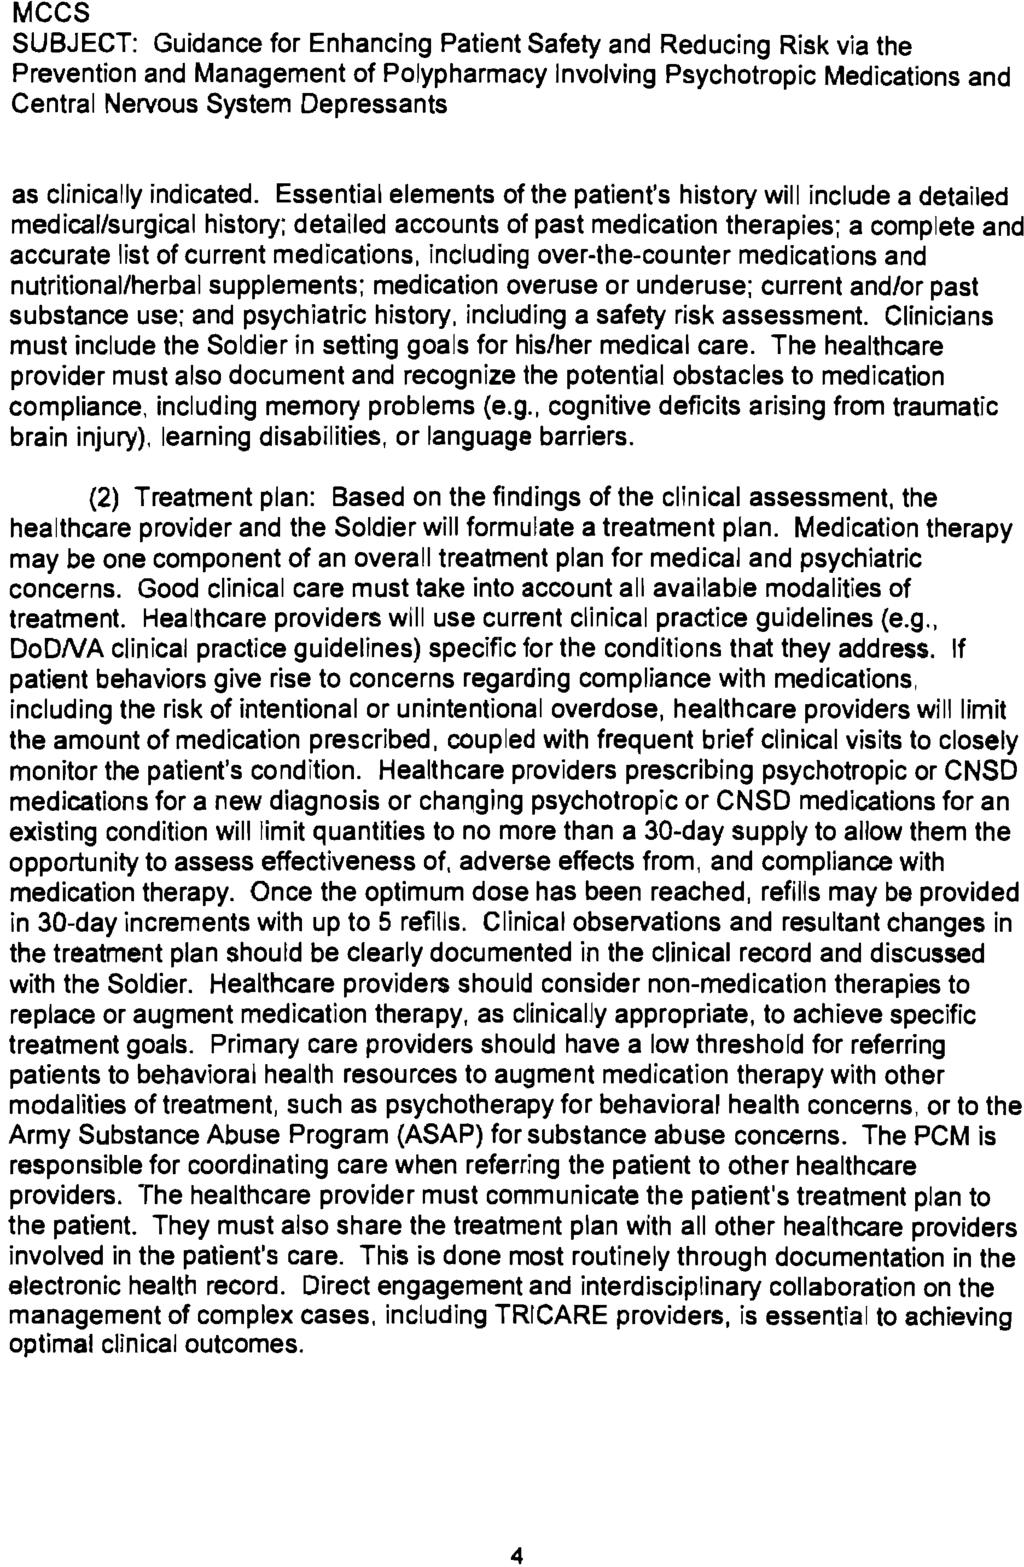 MCCS SUBJECT: Guidance for Enhancing Patient Safety and Reducing Risk via the Prevention and Management of Polypharmacy Involving Psychotropic Medications and Central Nervous System Depressants as